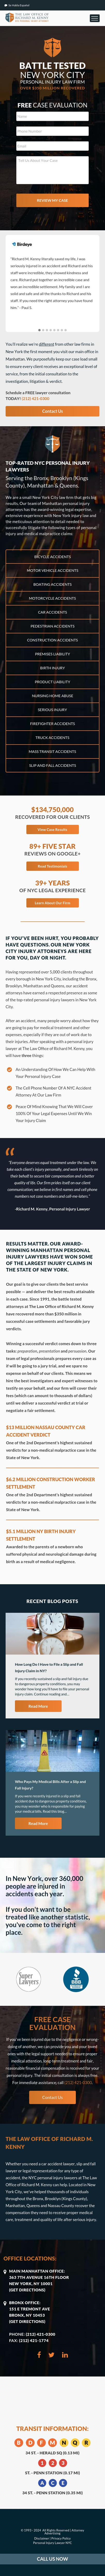 The Law Office of Richard M. Kenny - New York NY Lawyers